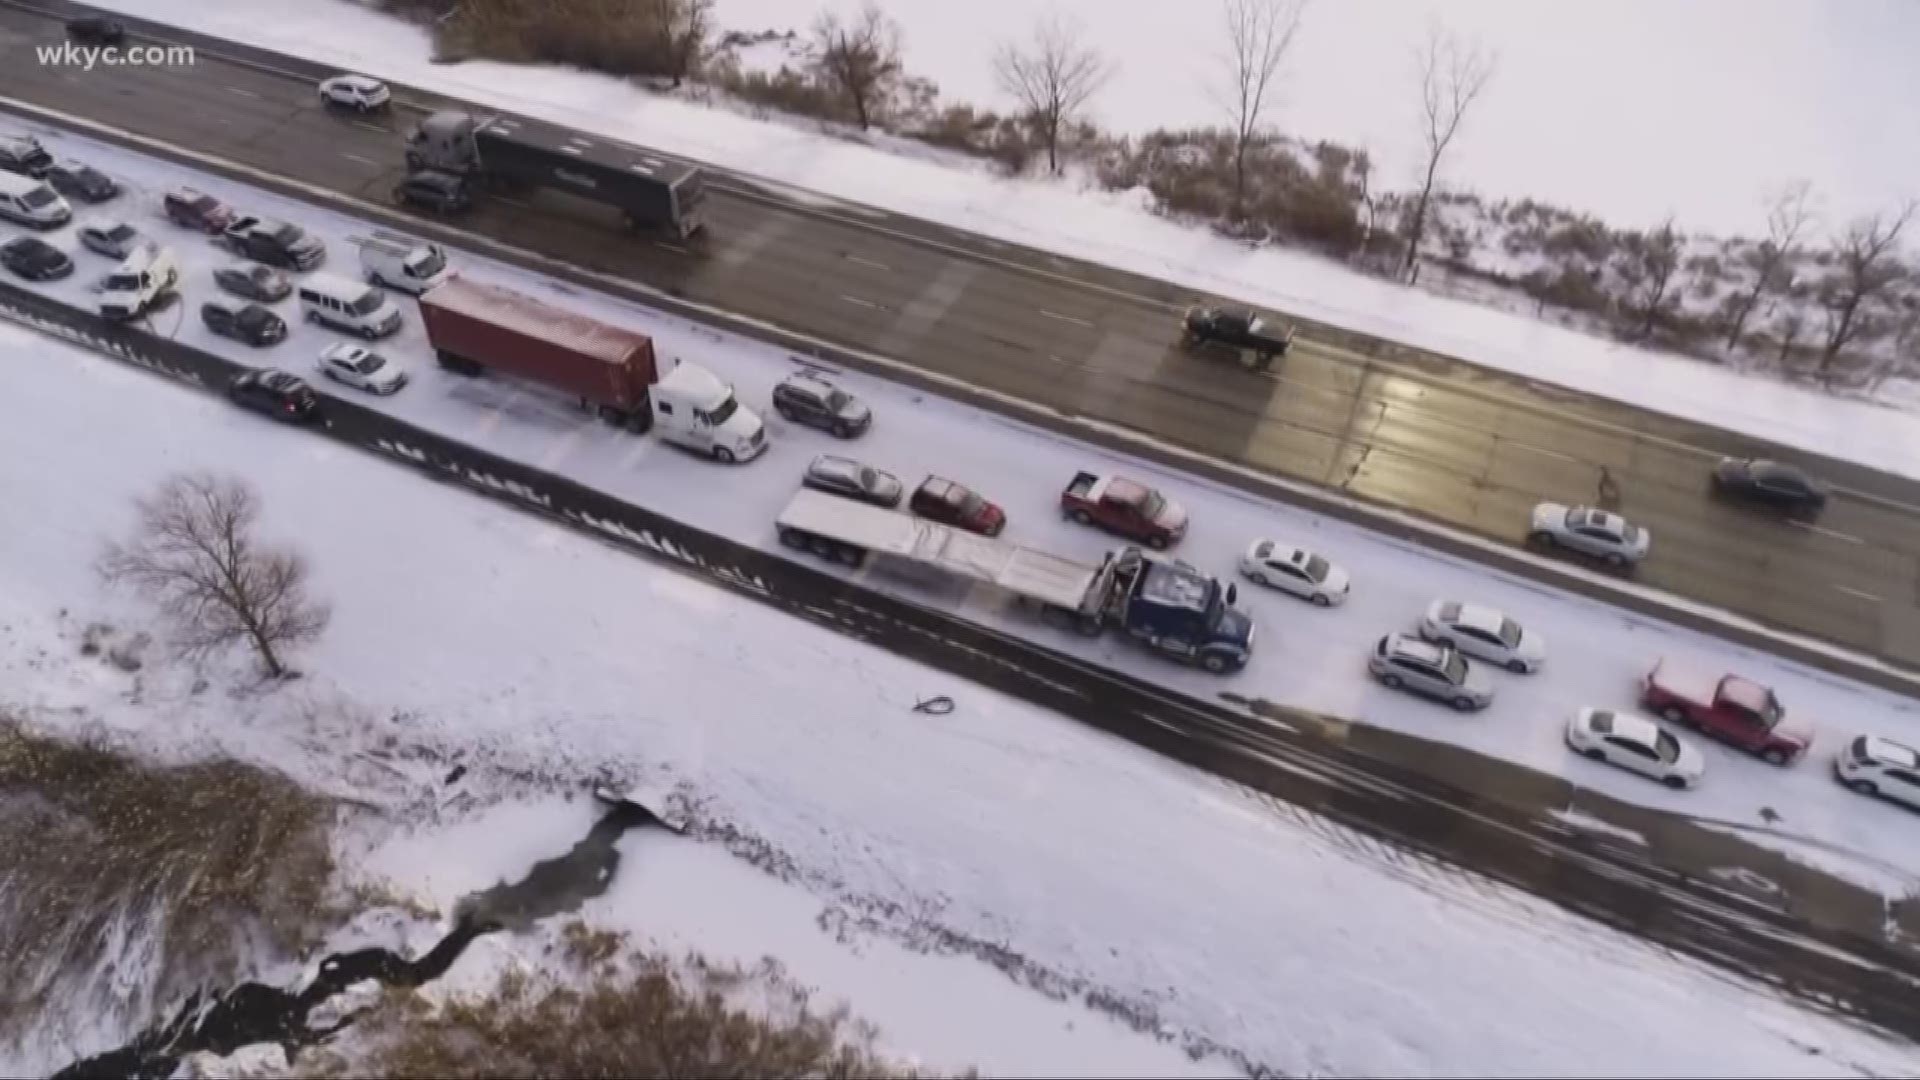 The massive pileup delayed traffic for hours on the freeway.